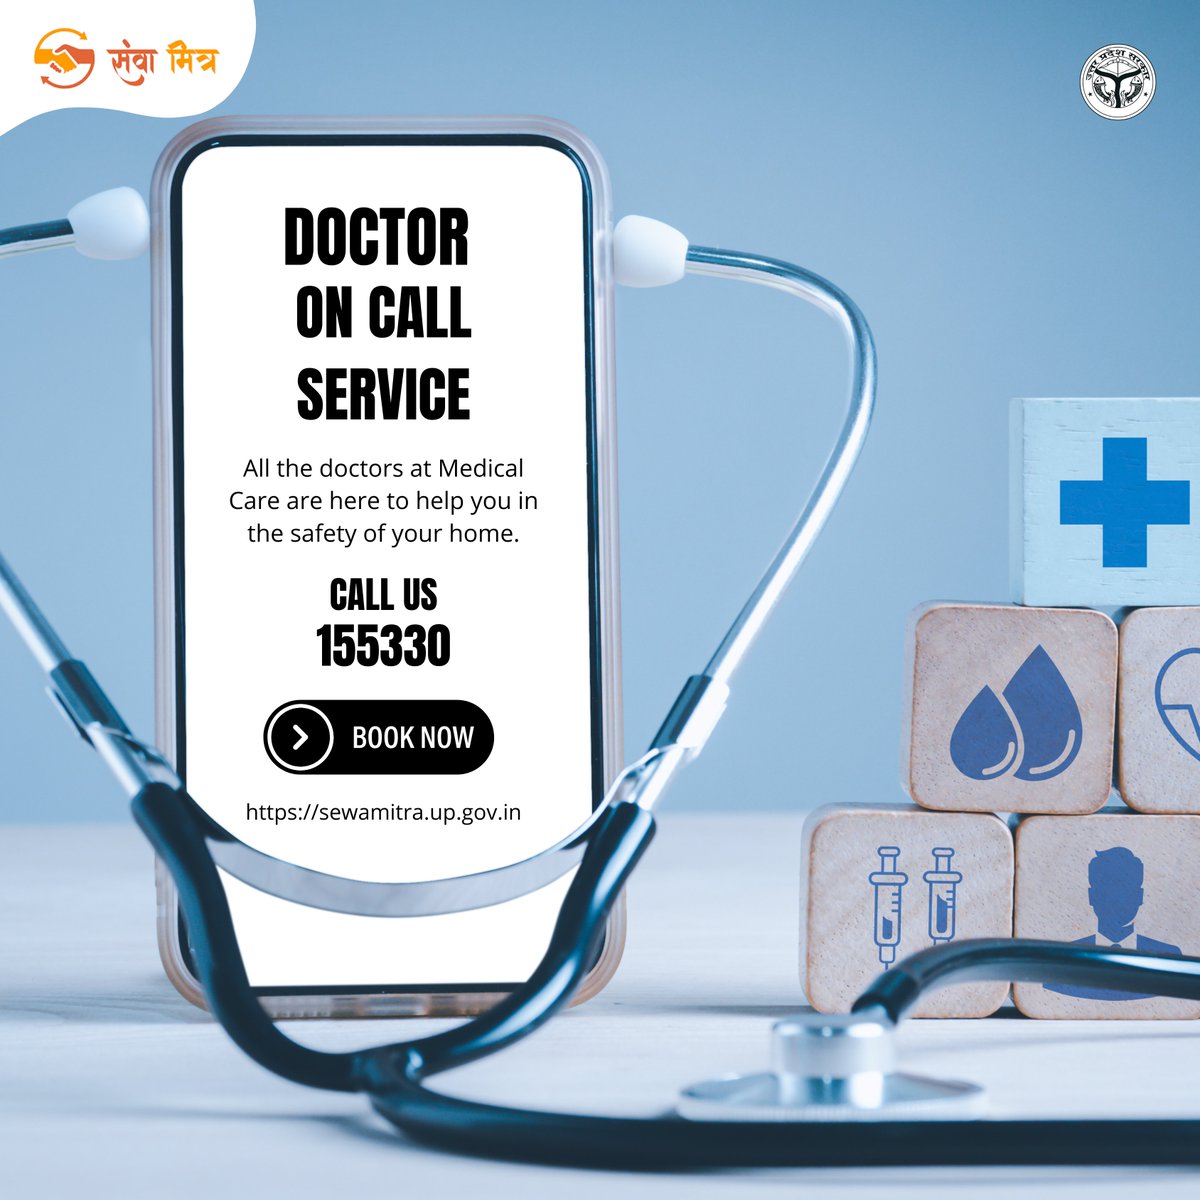 Doctor on call service Call us at 155330
All the doctors at Medical Care are here to help you in the safety of your home.

#doctor #doctors #doctoroncall #doctoroncall💊  #doctoroncallservice #Sewamitra #sewamitra #sewamitraapp #AKMU #BCCI #BRICS #KIMJINWOO #doctoroncallservices